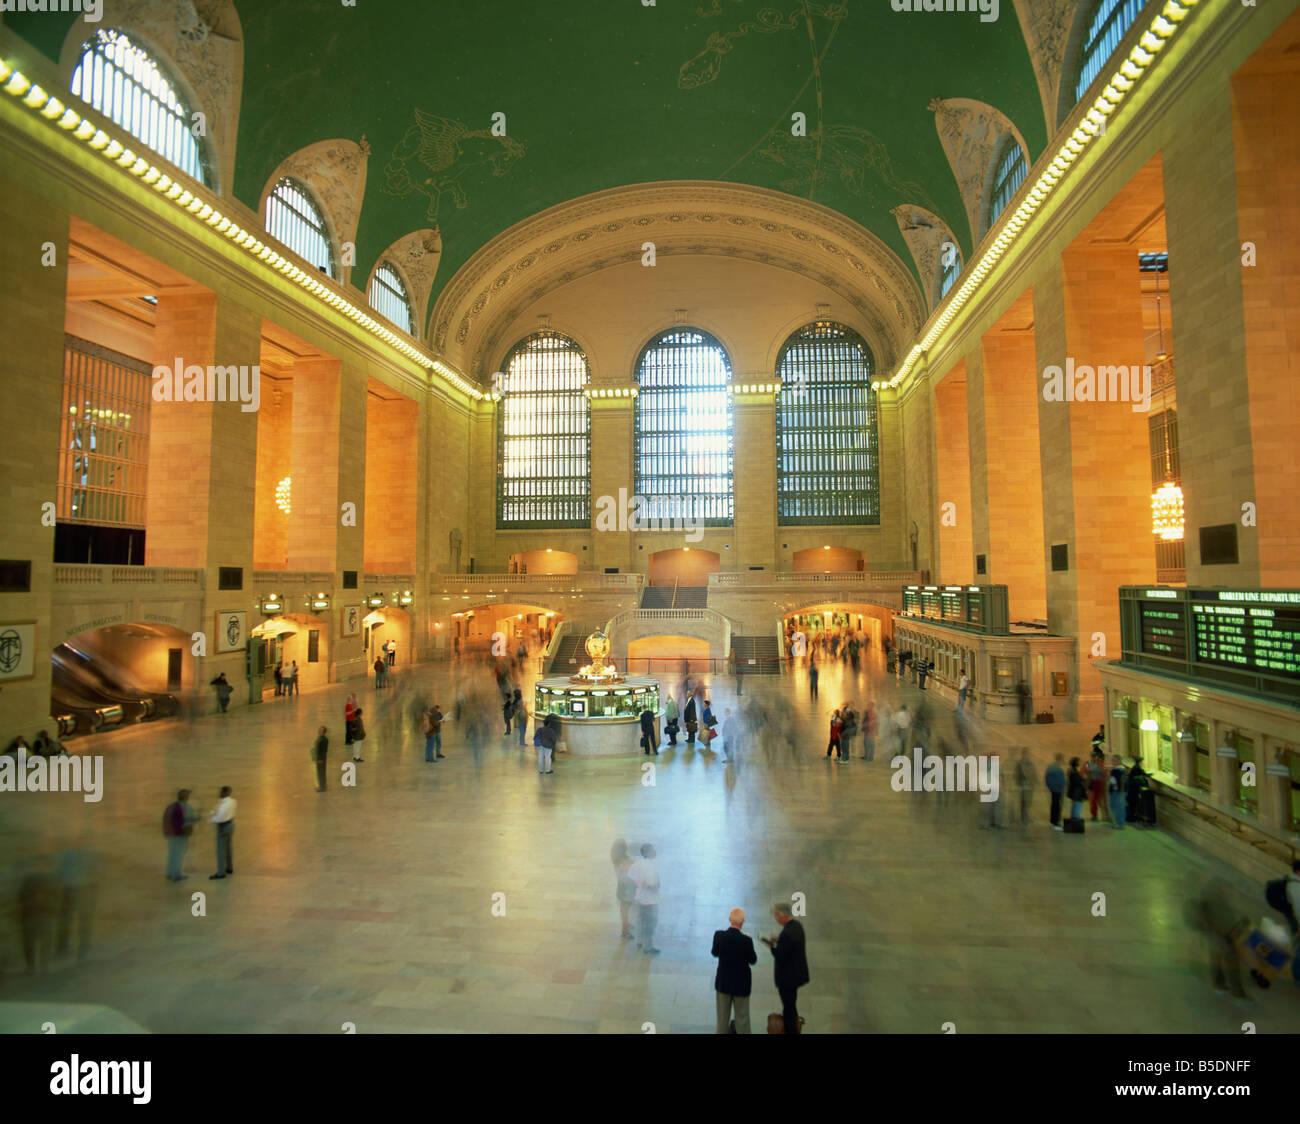 Interior of Grand Central Station New York United States of America North America Stock Photo